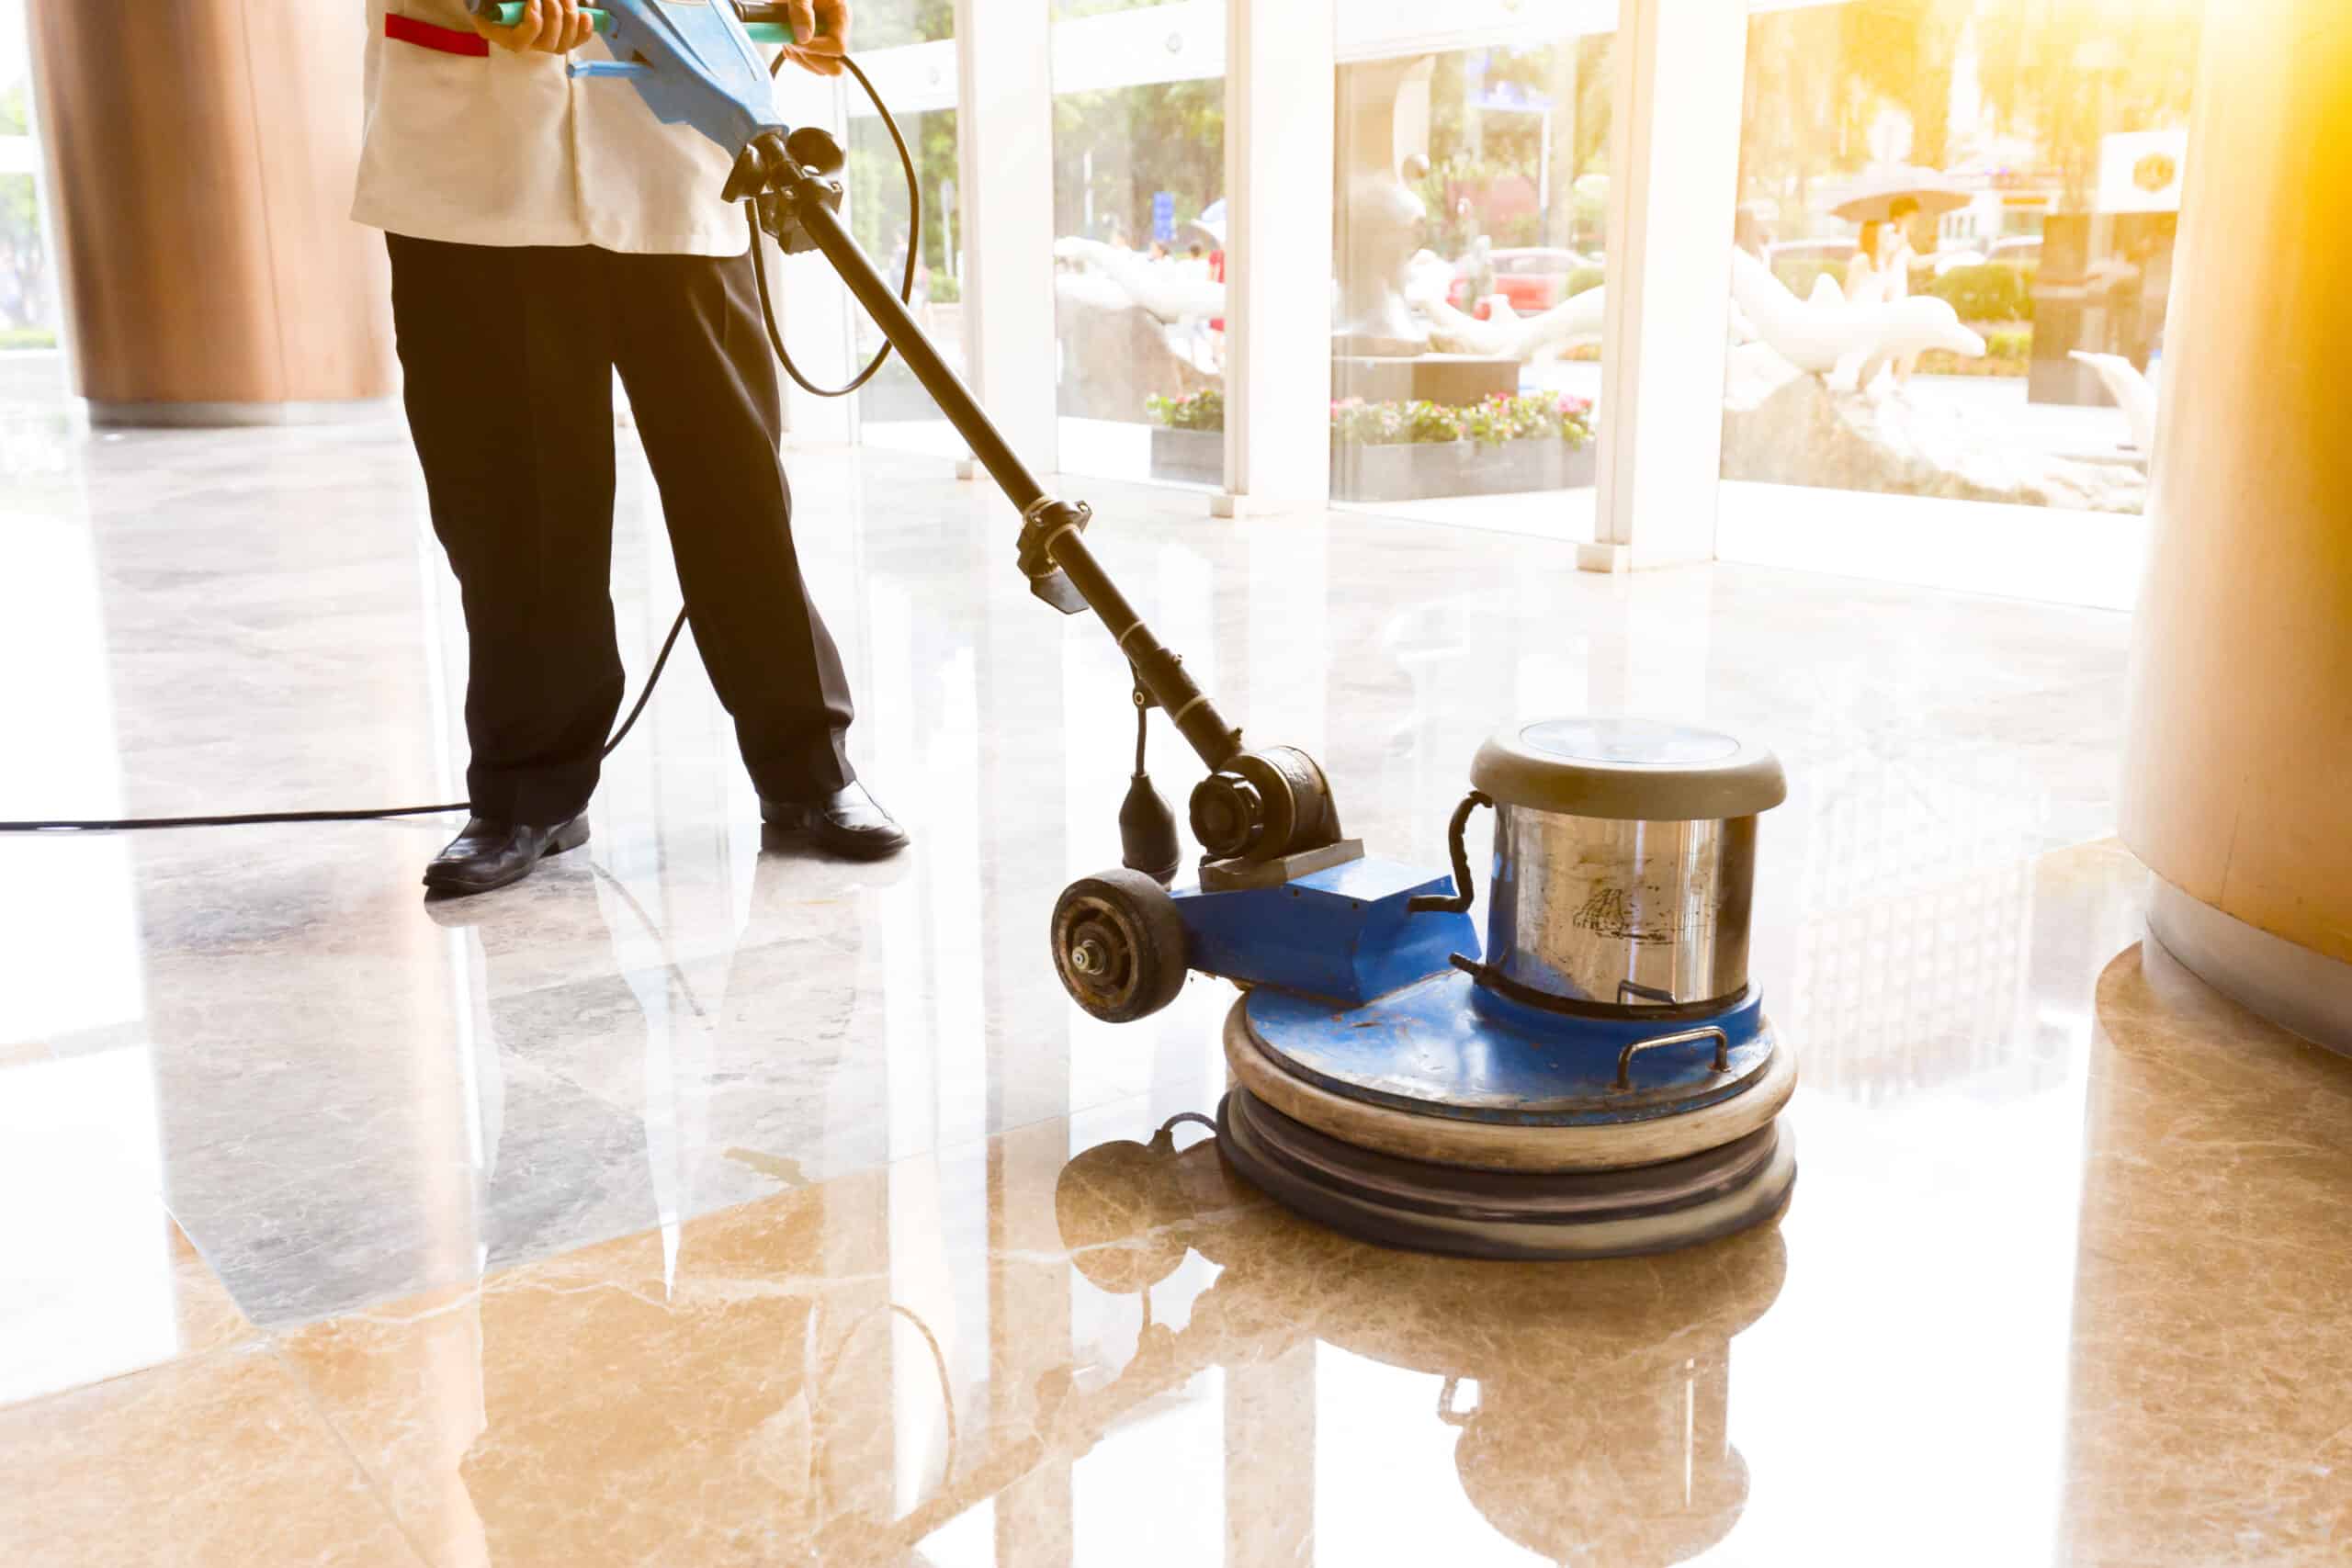 Commercial Floor Cleaning Equipment - How to Choose